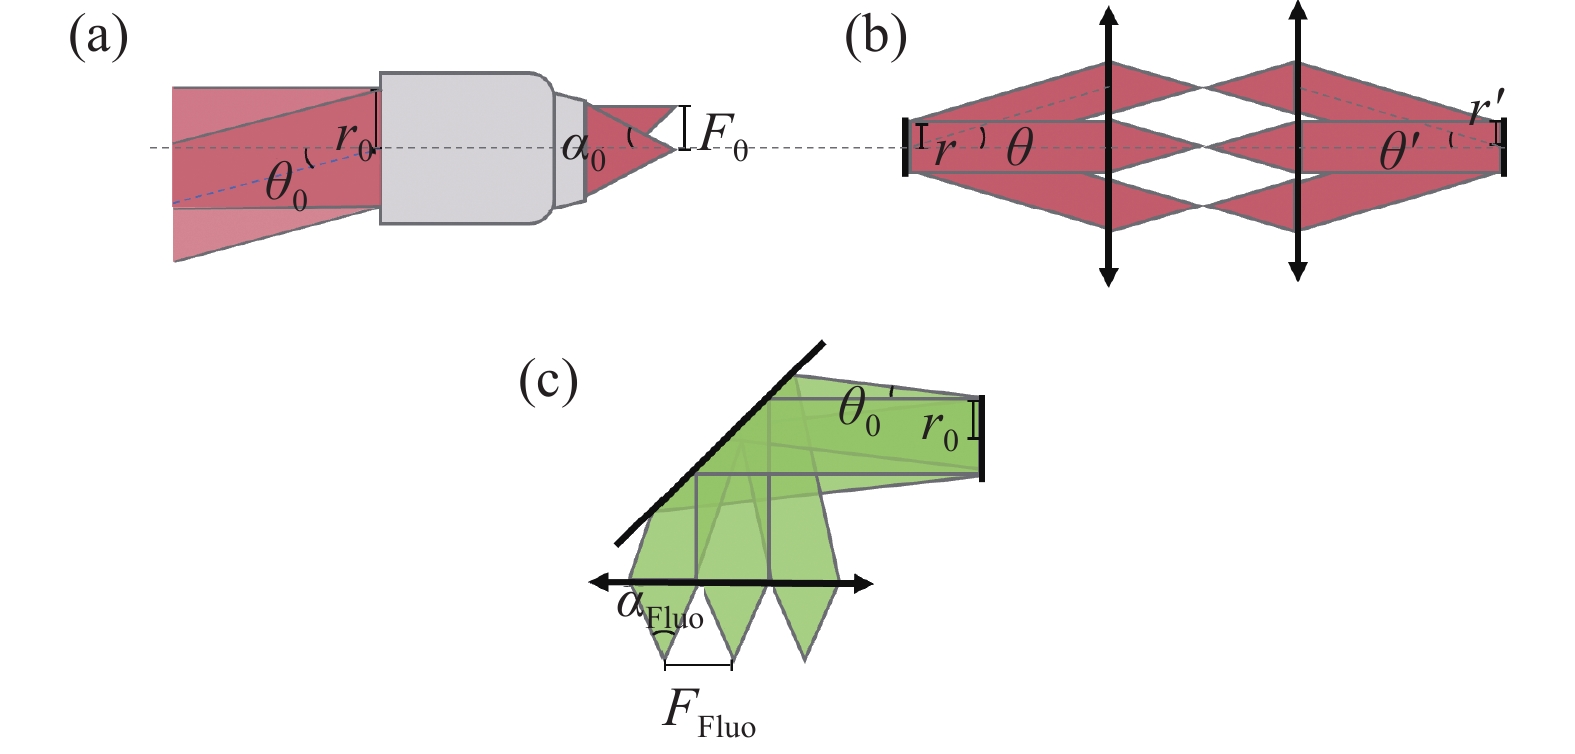 Definition of optical invariants. (a) Optical invariants of the imaging objectives; (b) Optical invariants of the scanning relay; (c) Optical invariants of the fluorescence collection system